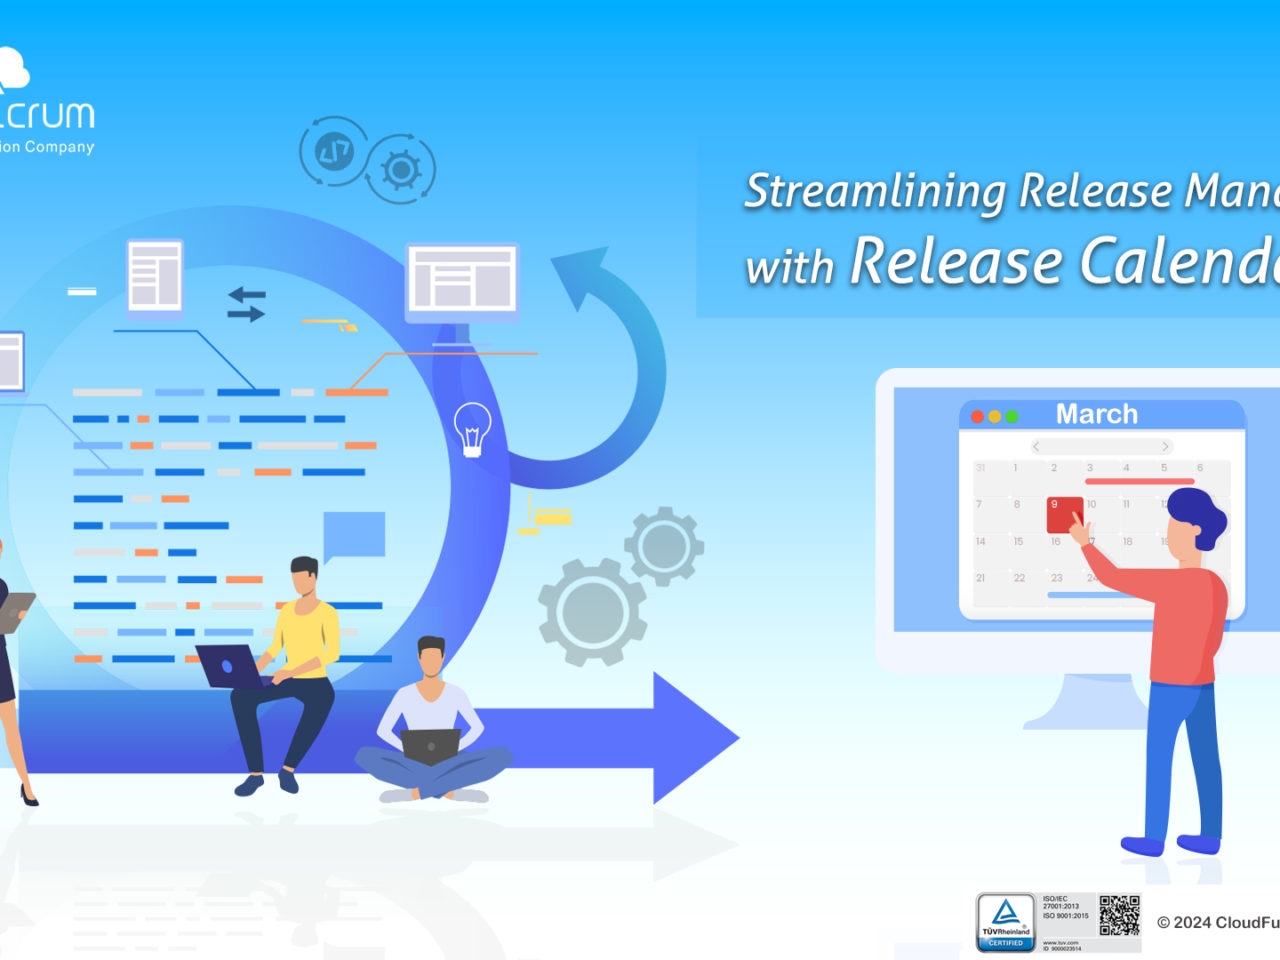 Streamlining Release Management with Release Calendar